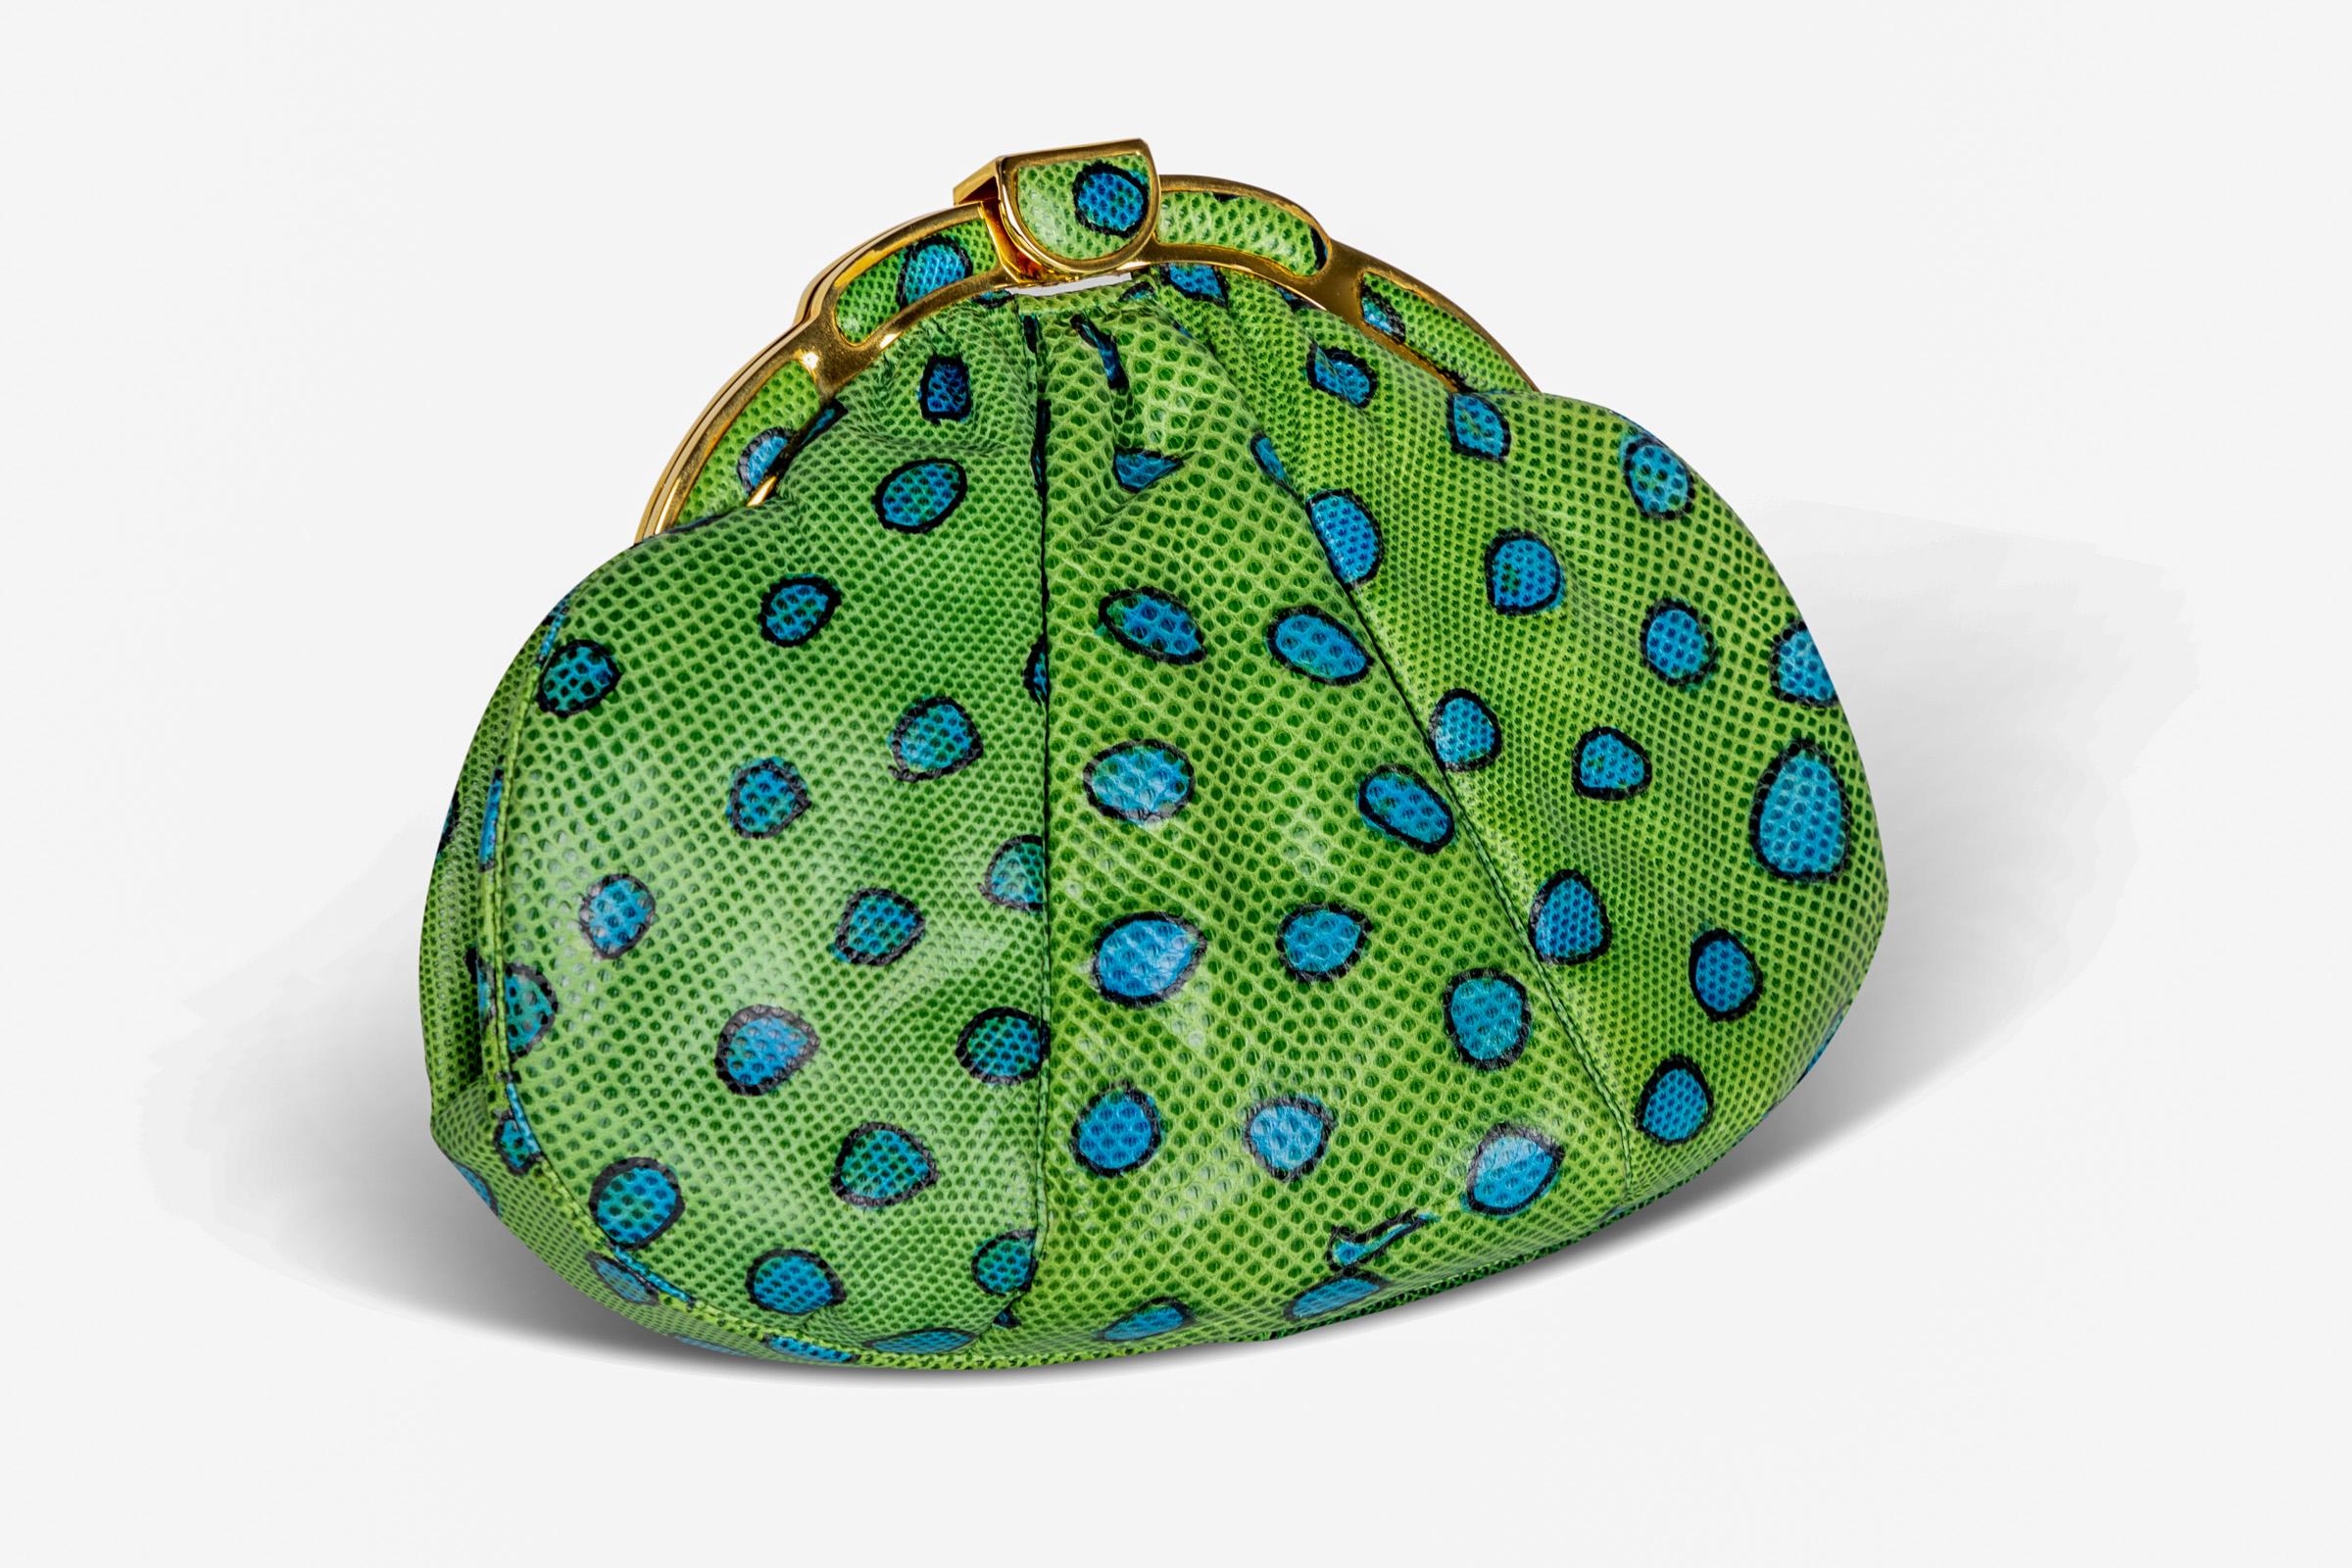 Creativity is certainly a defining feature of Judith Leiber bags. From rhinestone encrusted sculptural pieces, to hand-decorated leathers in unconventional color combinations, Judith Leiber’s constant production of artistic and unexpected designs